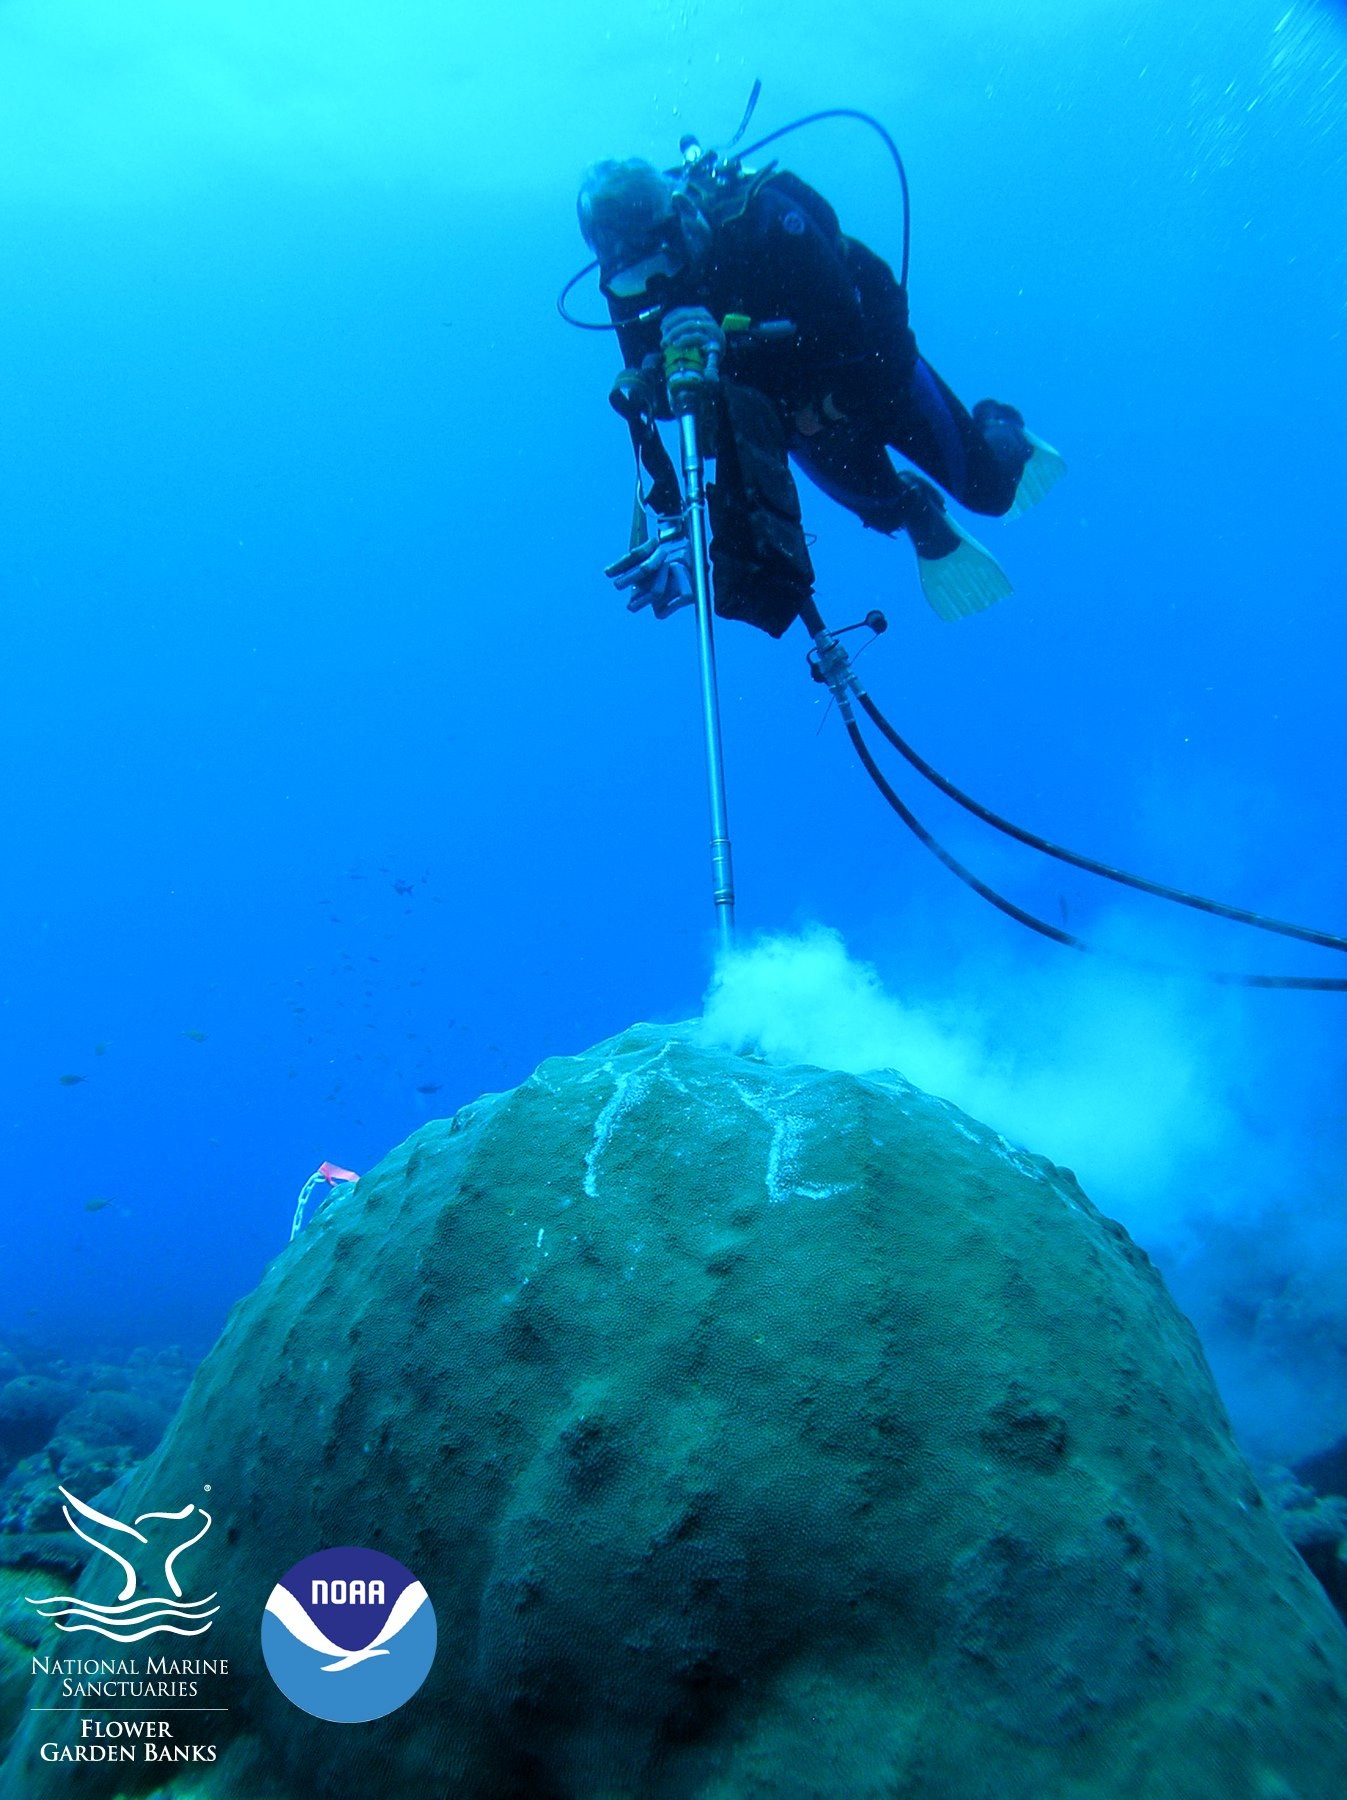 Scuba diver drilling a coral in Flower Garden Banks